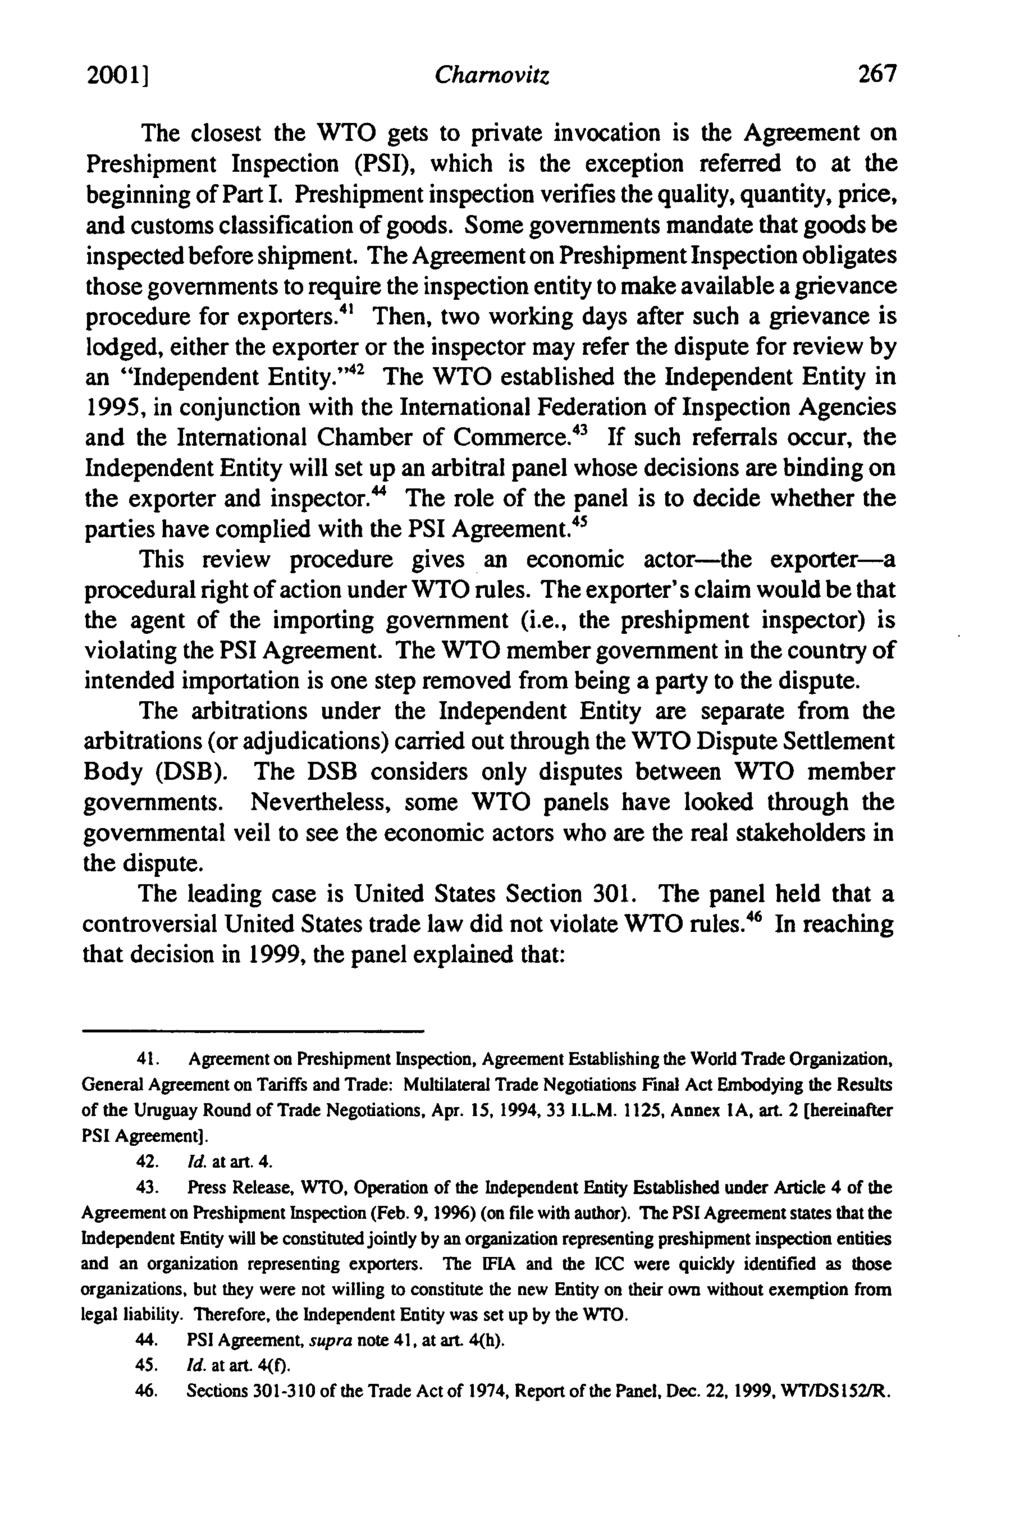 20011 Charnovitz The closest the WTO gets to private invocation is the Agreement on Preshipment Inspection (PSI), which is the exception referred to at the beginning of Part I.